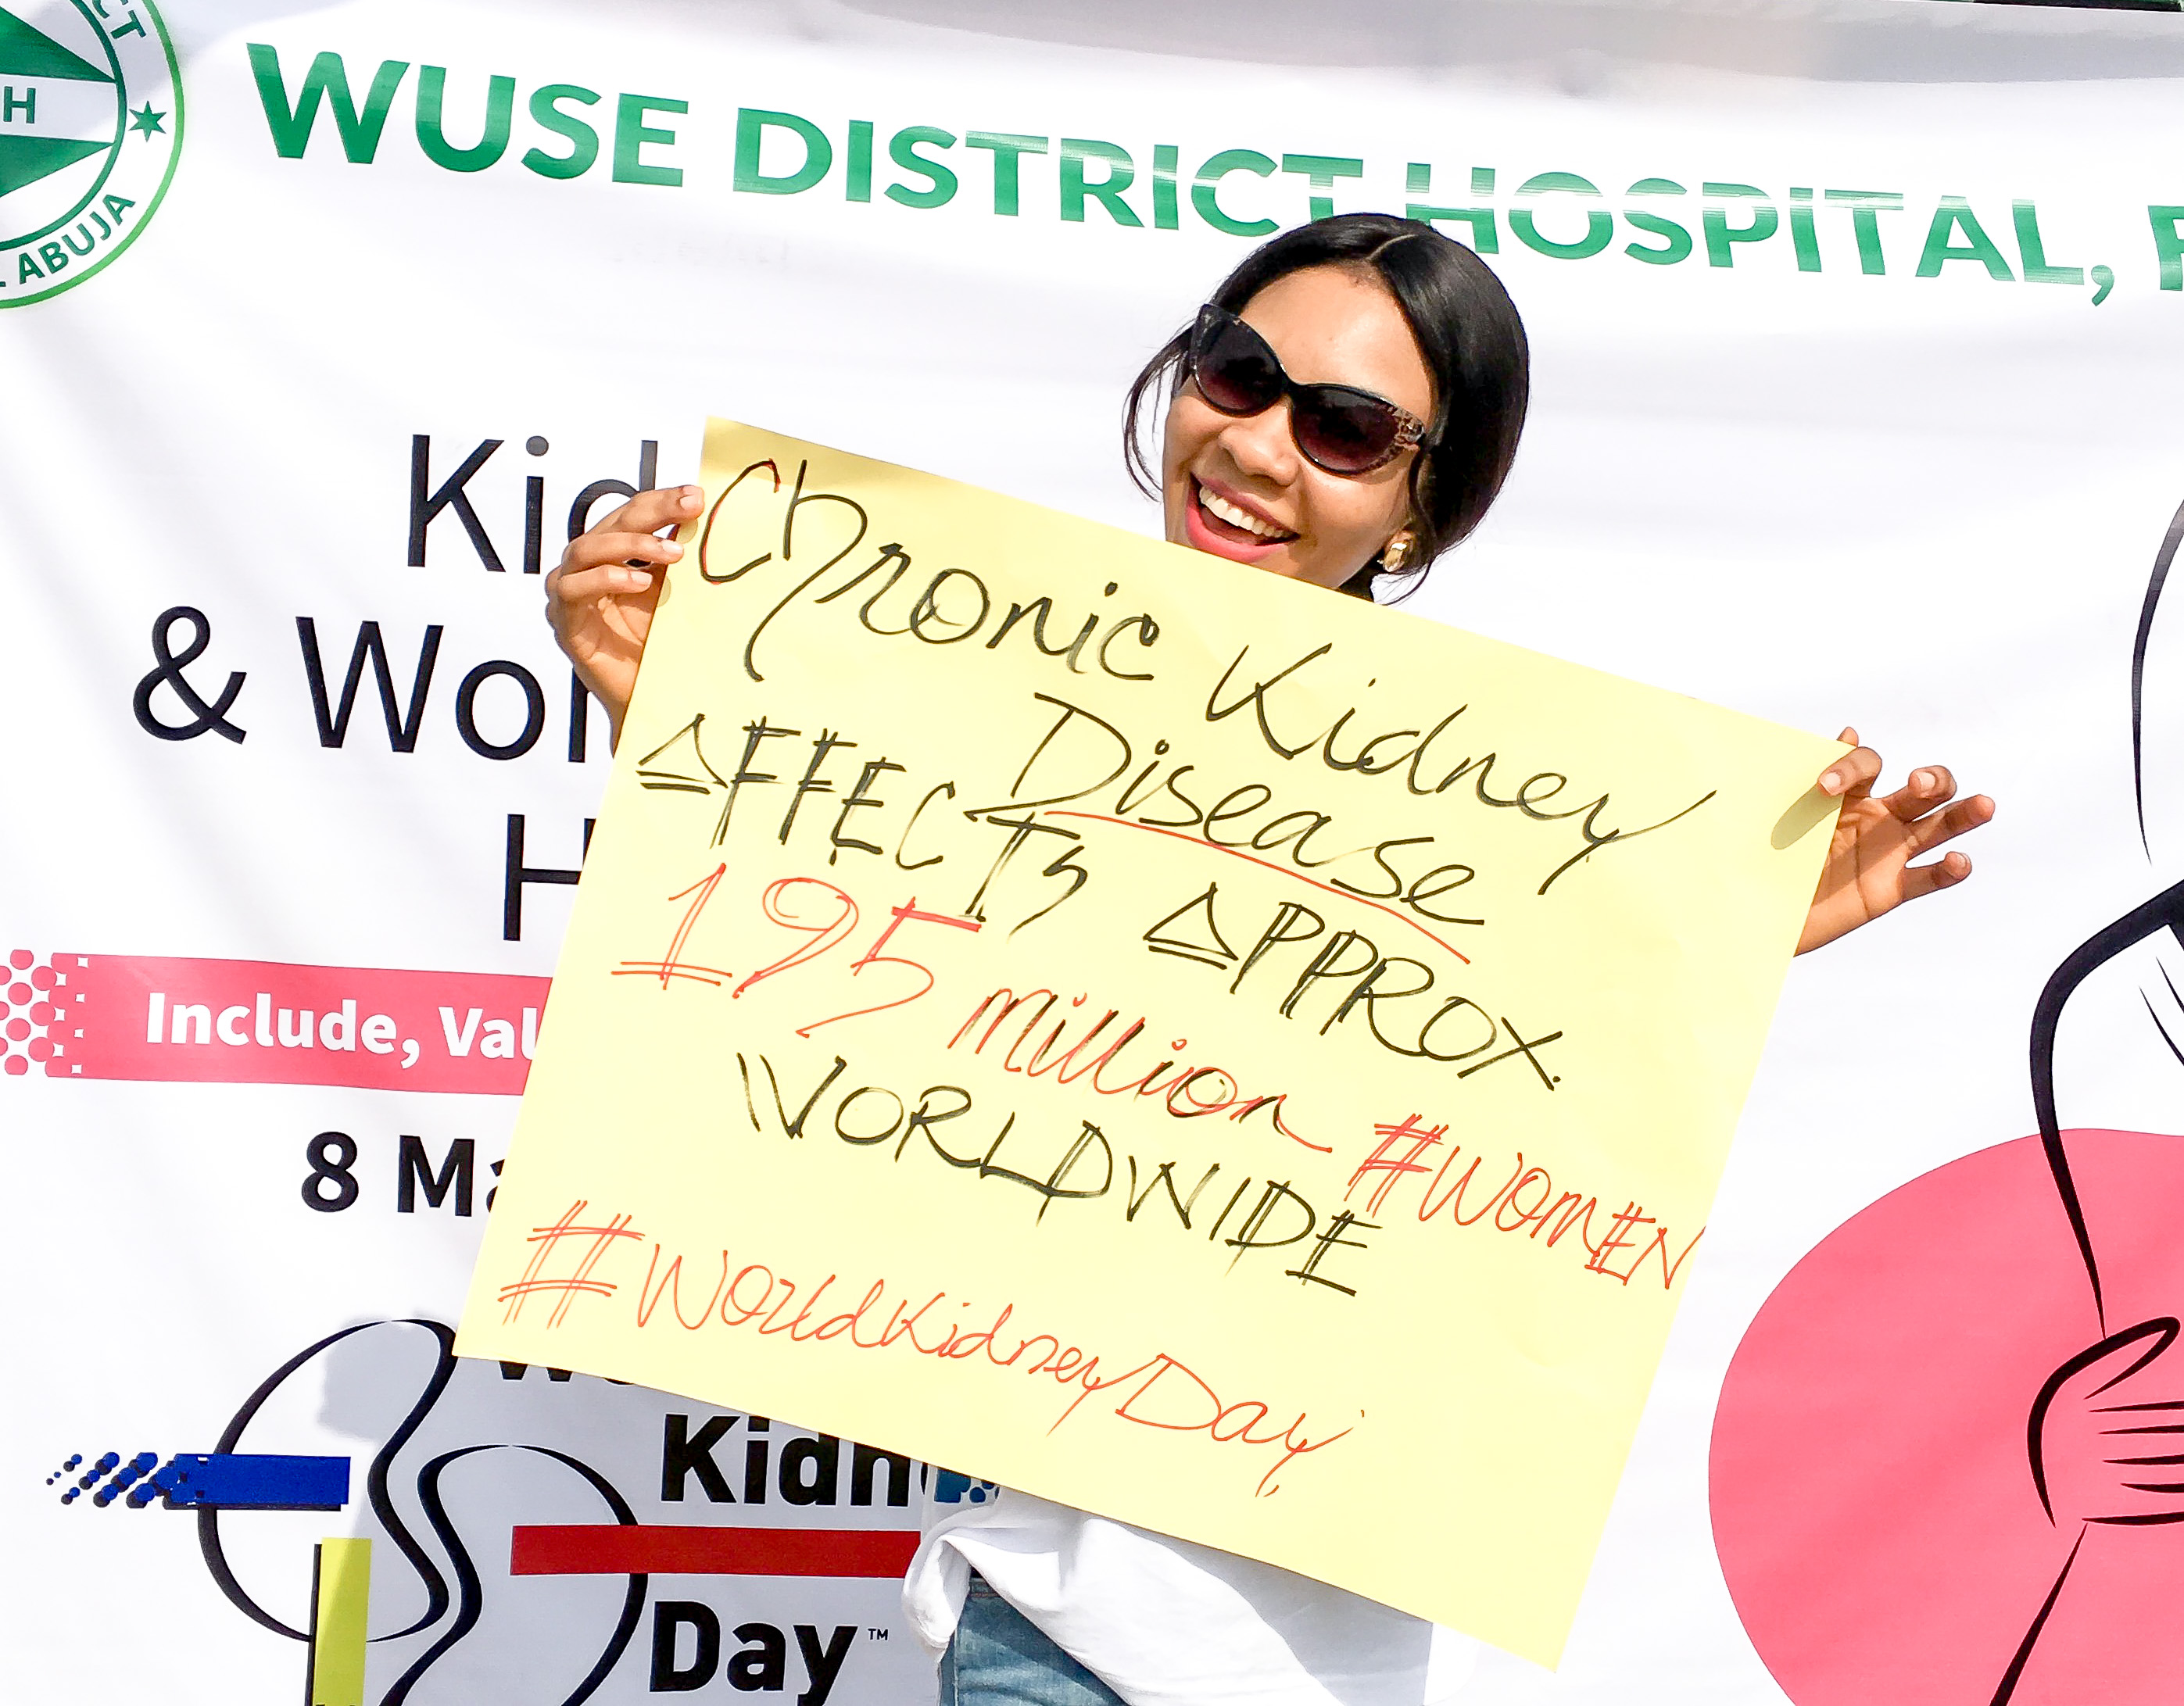 World kidney day 2018 and international women's day at Wuse district hospital 